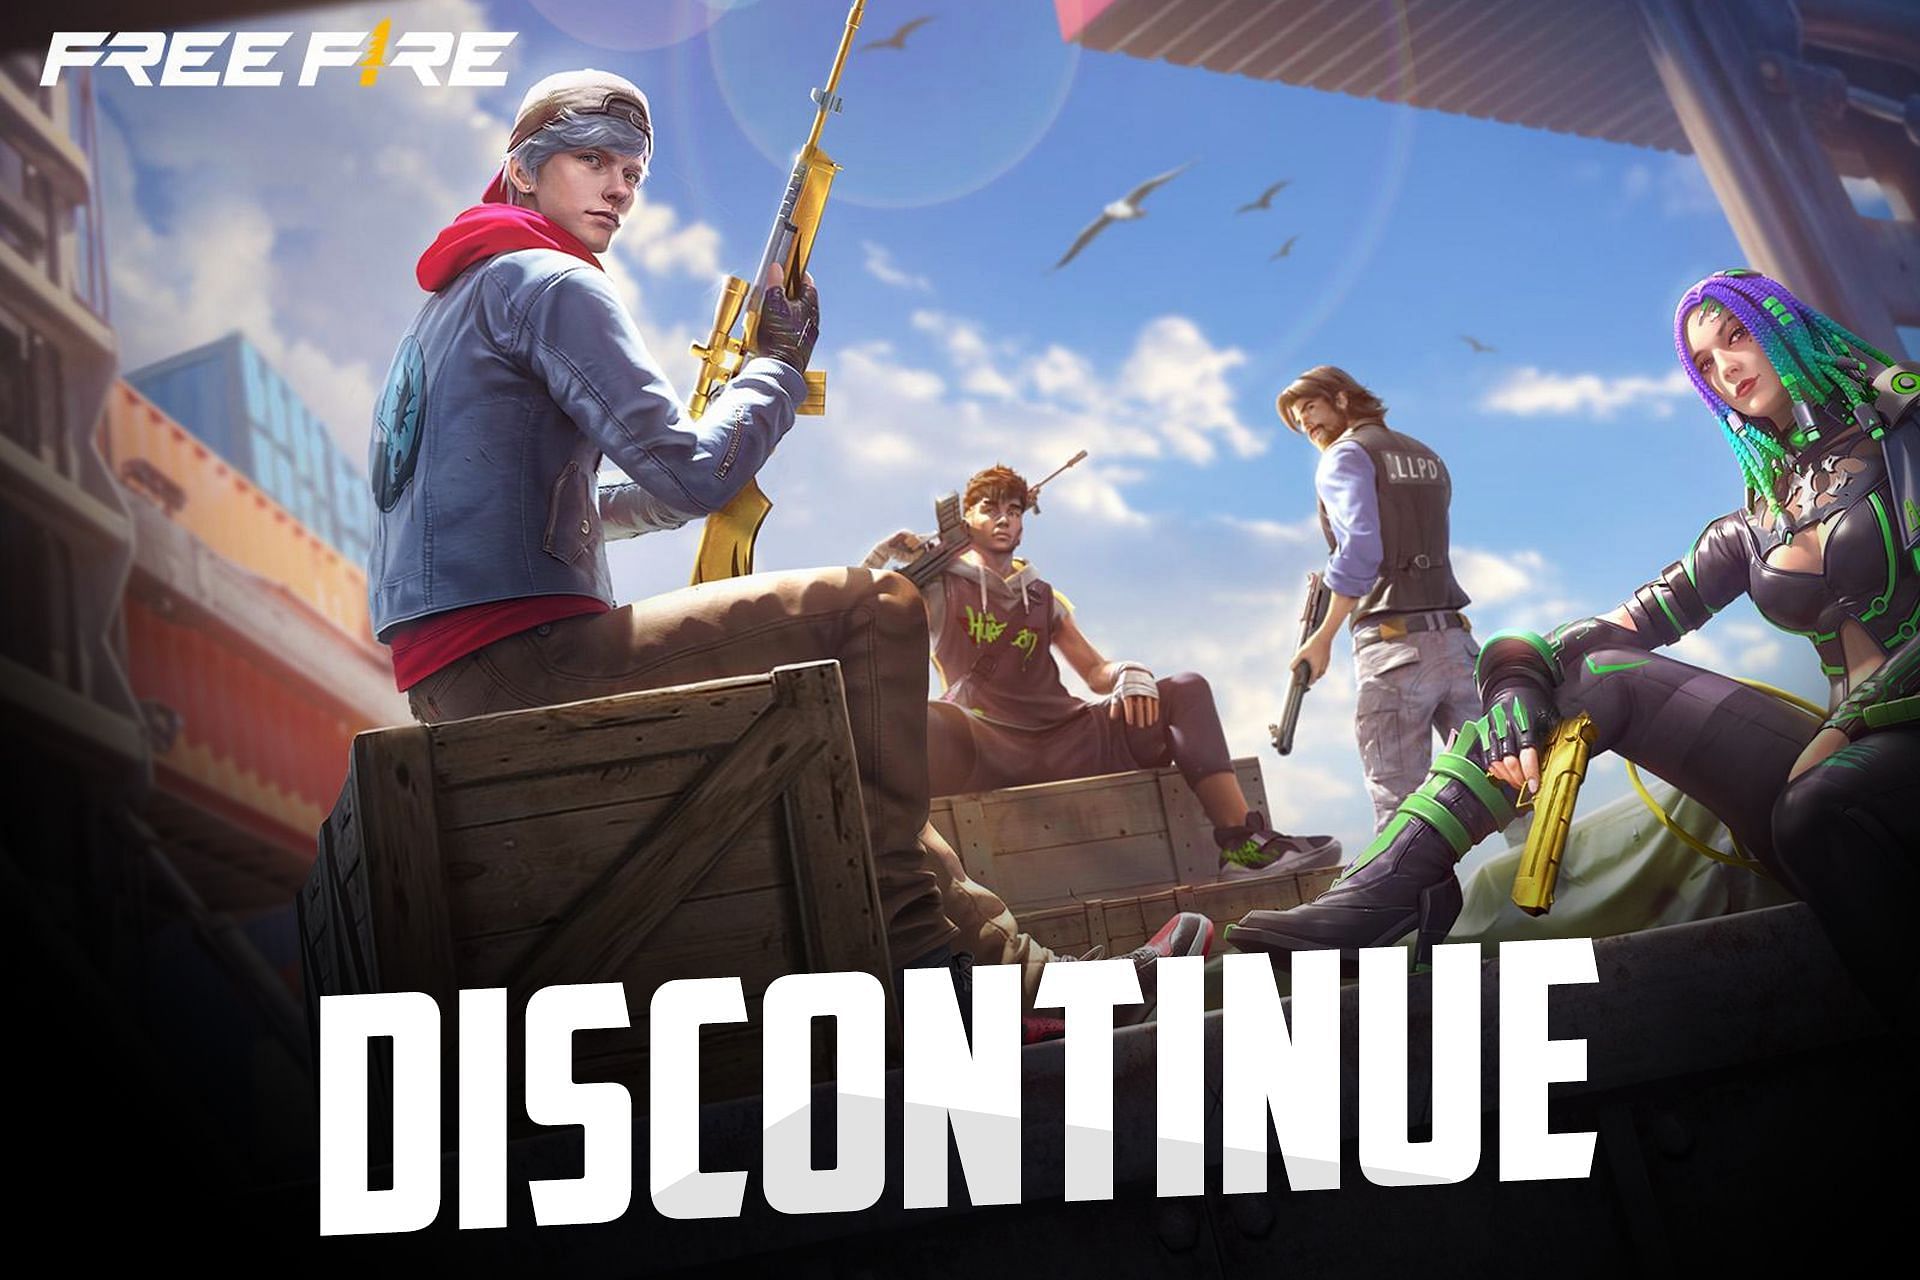 Report: Garena to discontinue Free Fire max after March 21, 2023 .  #freefiregame #freefire #ff #gaming #esports #mcops